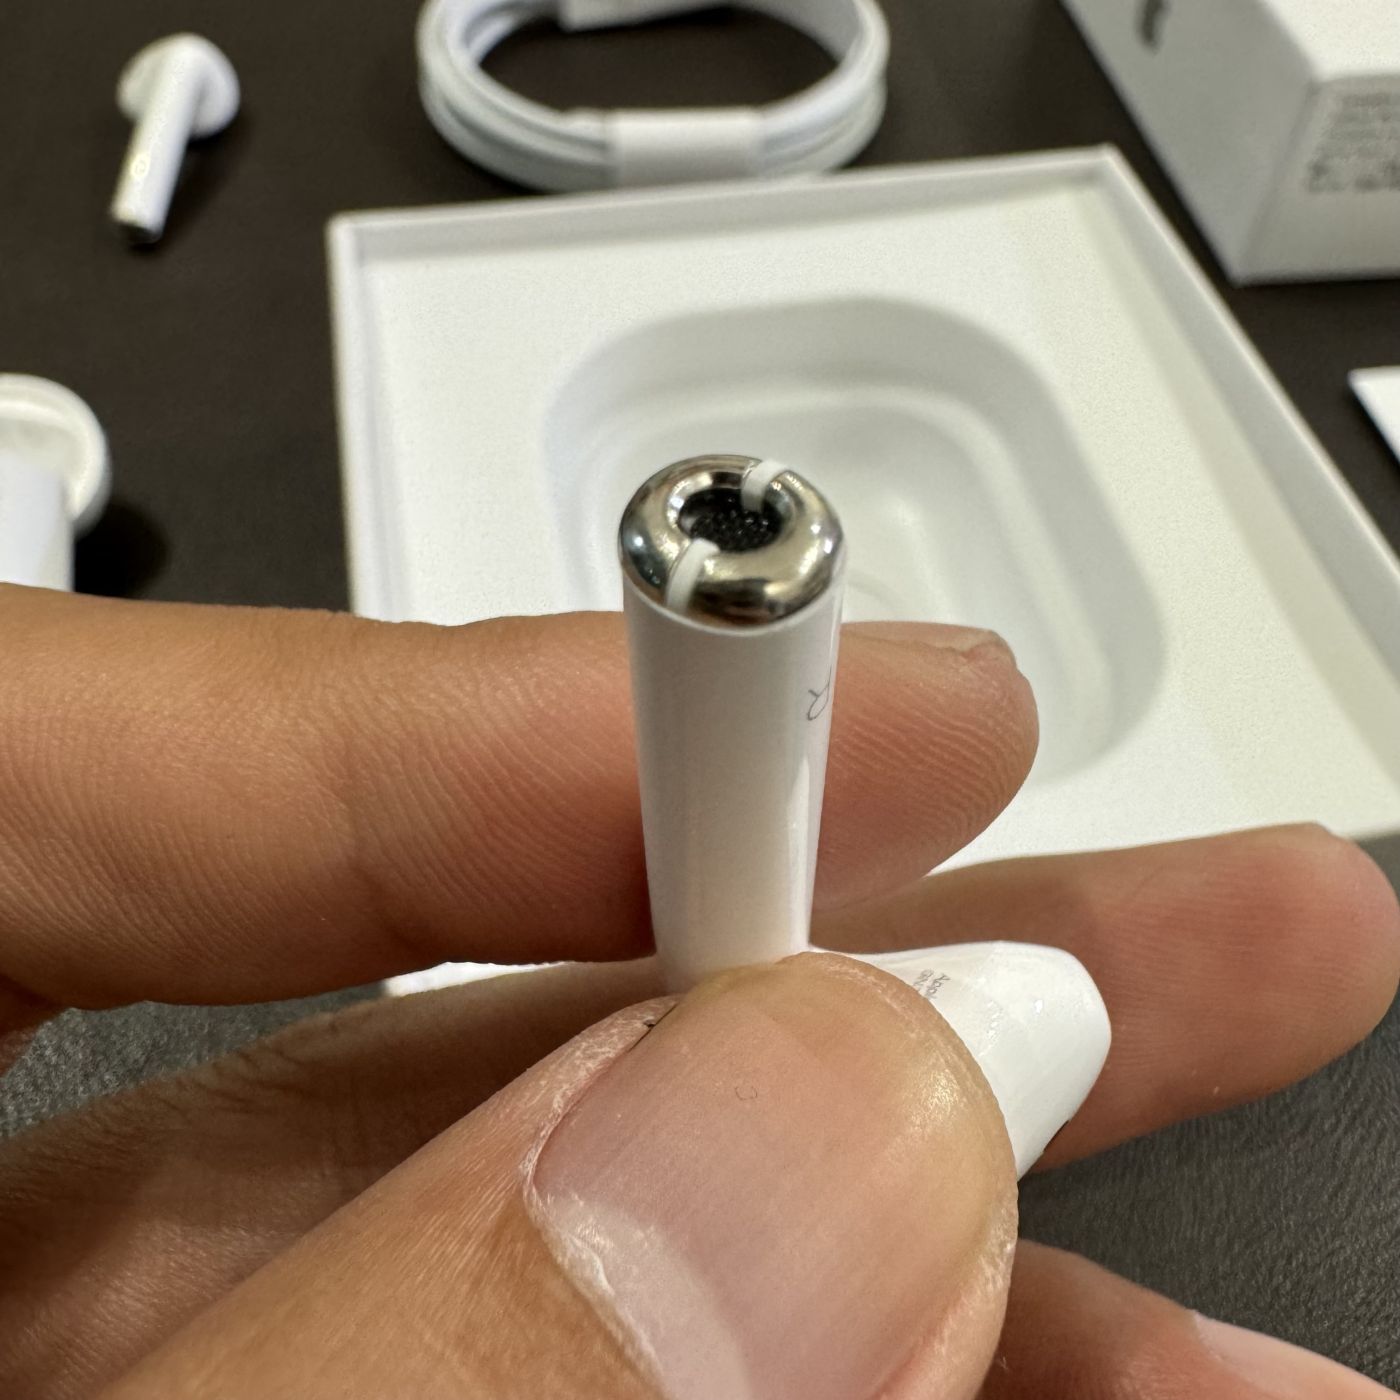 Tai nghe Airpods 2 chip Jerry Loại 1